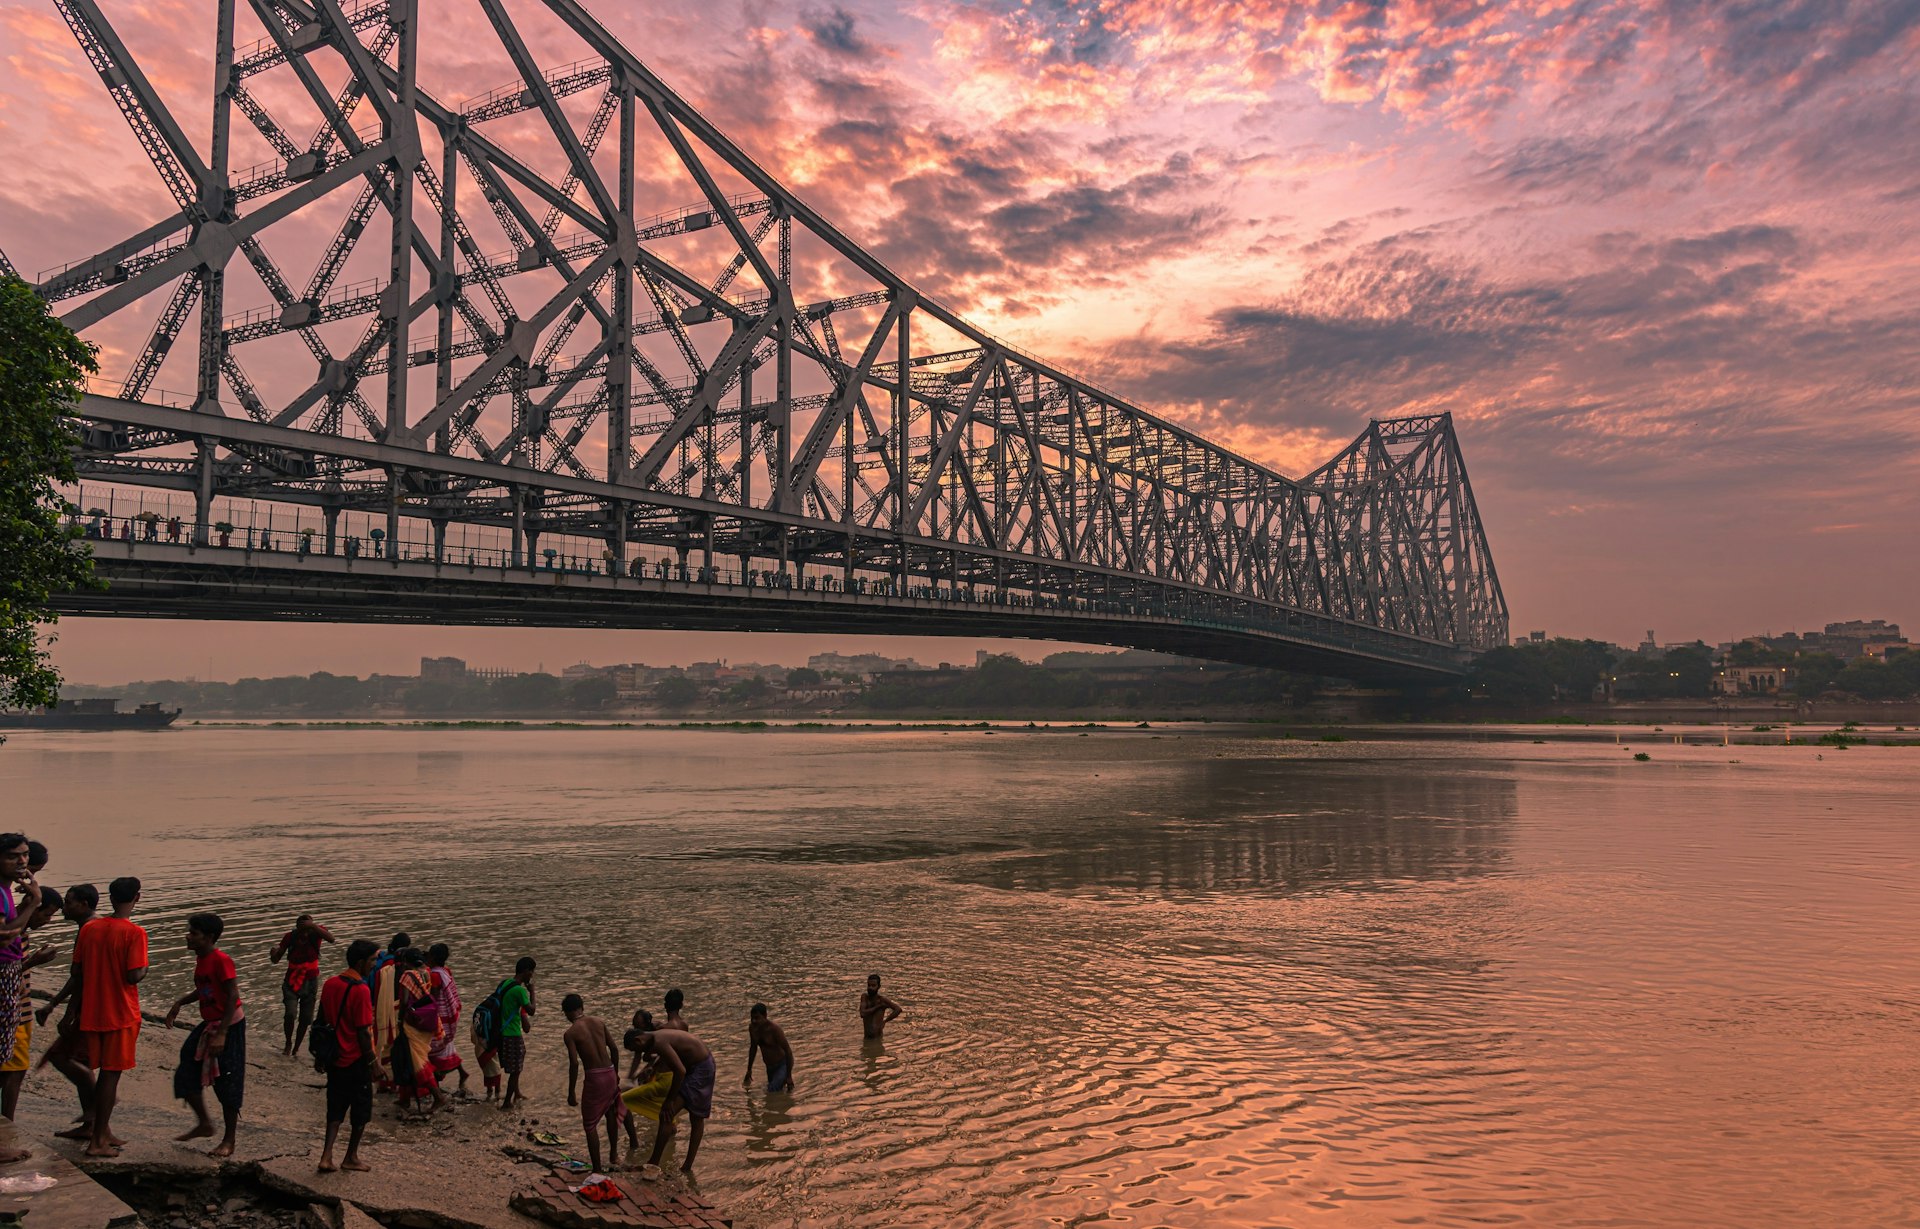 A group of children bathe in the Hooghly River next to one of Kolkata's large bridges in the early evening light.